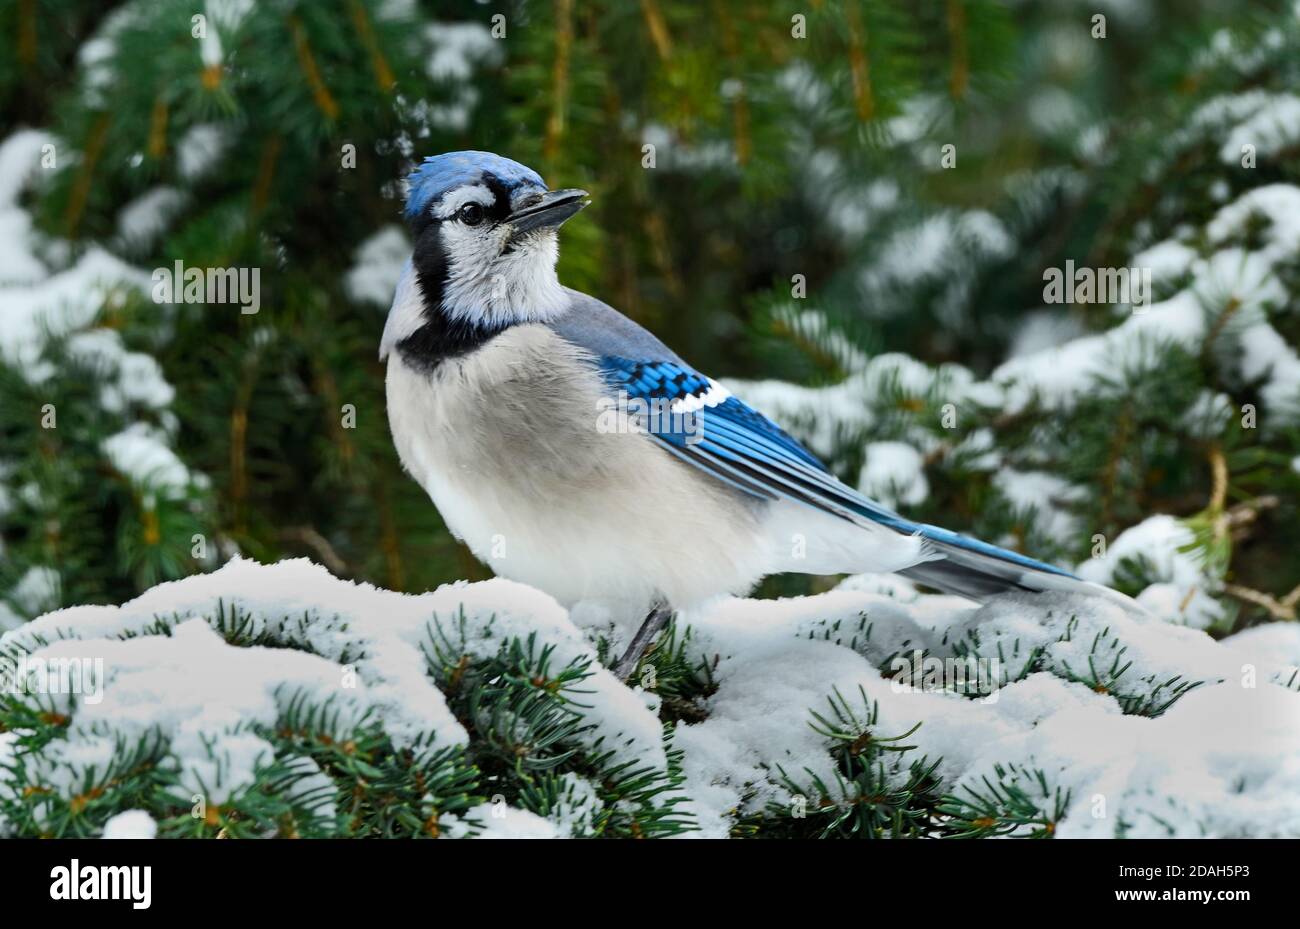 An eastern Blue Jay,' Cyanocitta cristata', perched on a snow covered spruce tree branch in rural Alberta Canada Stock Photo